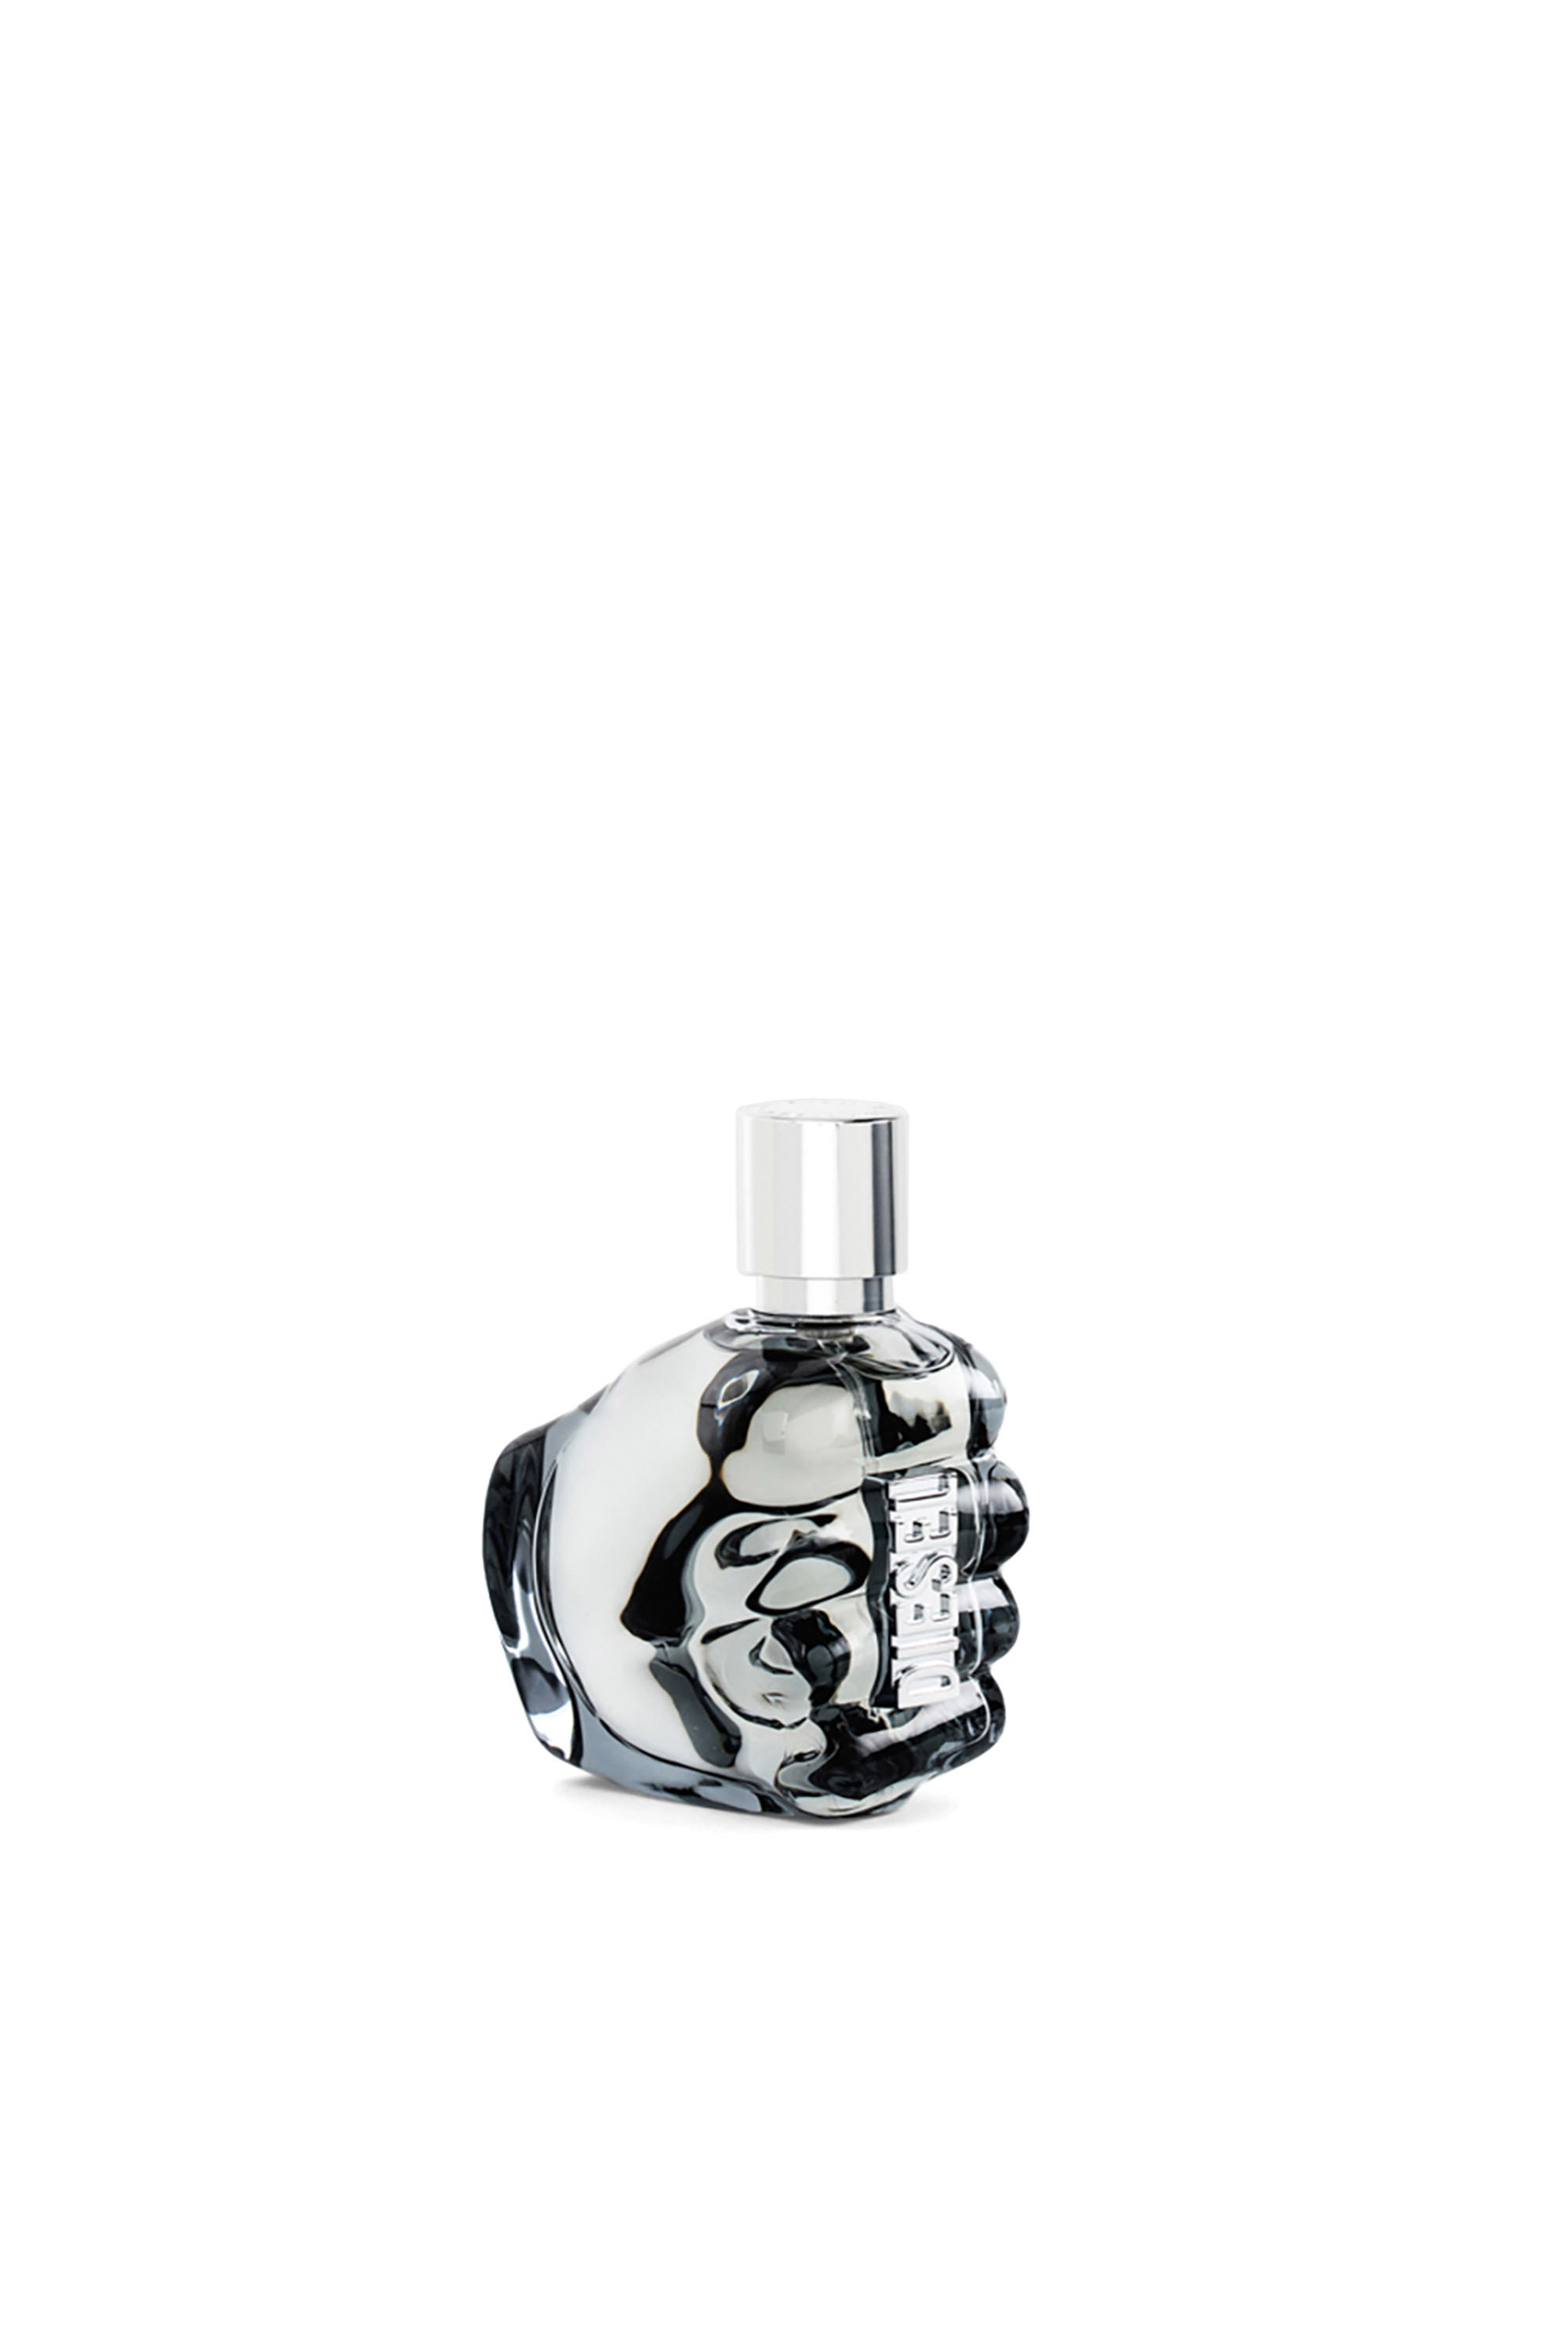 ONLY THE BRAVE 50ML